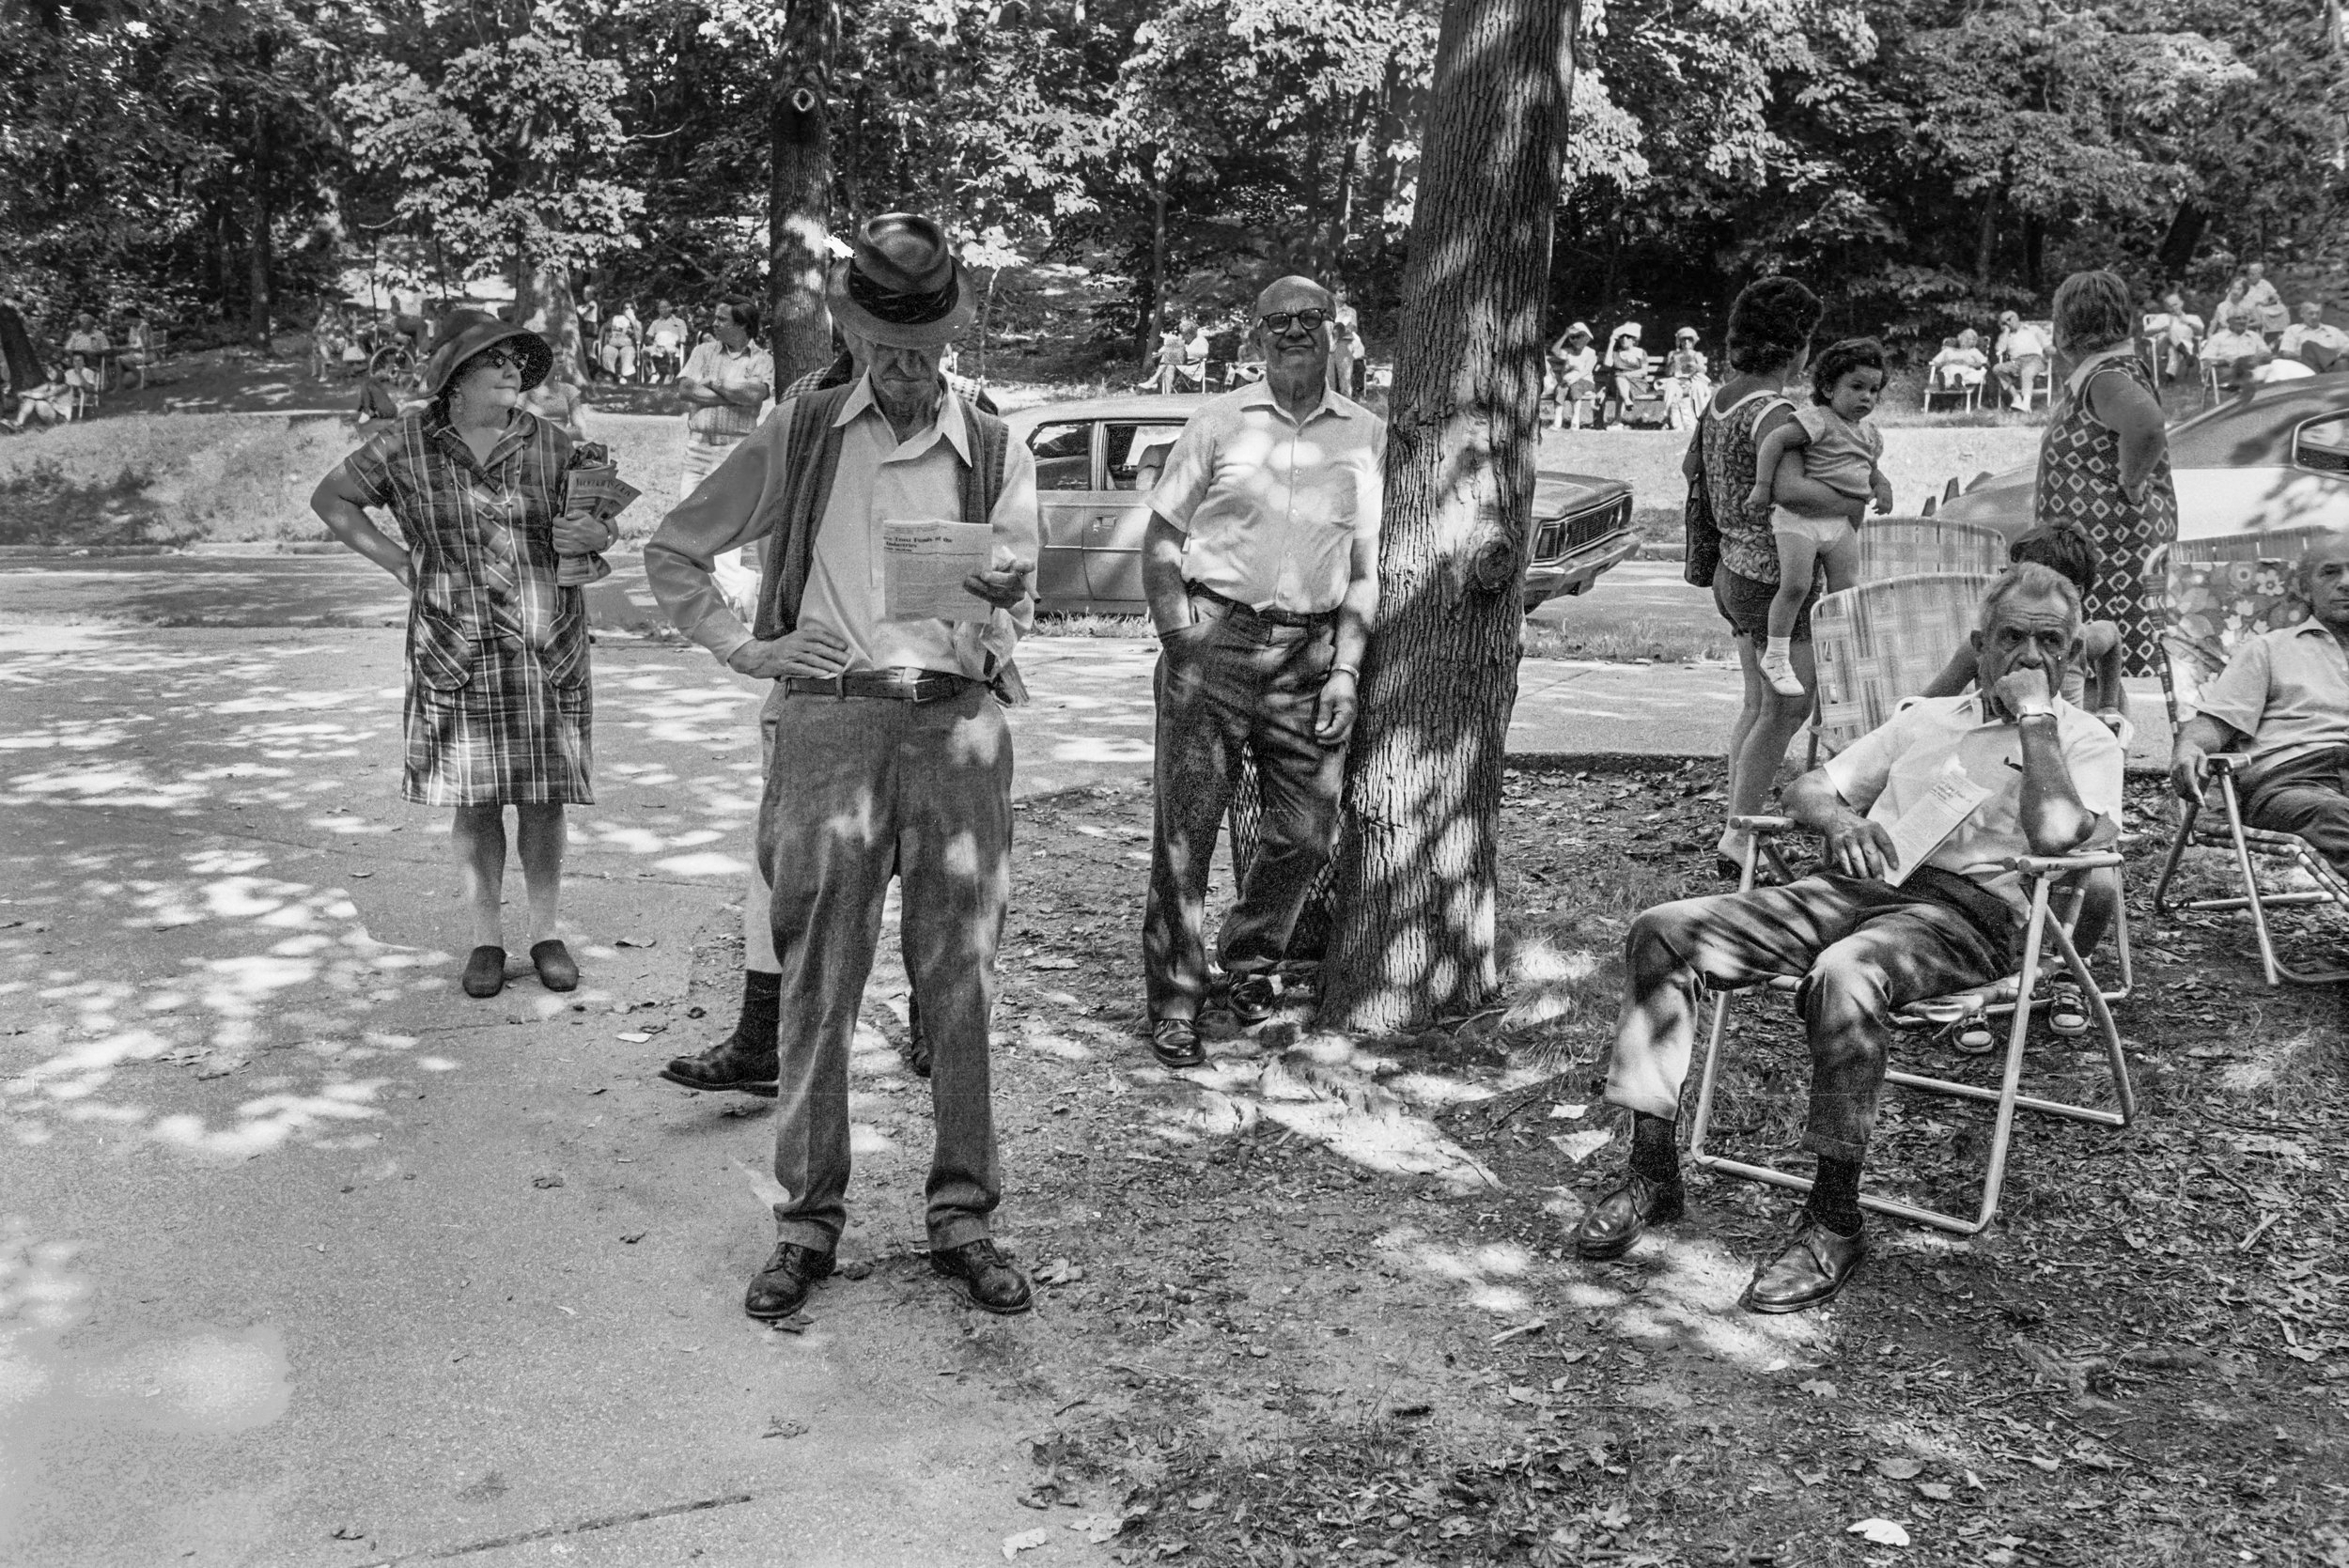   Waiting for Performance, Forest Park, Queens, NY, 1975  